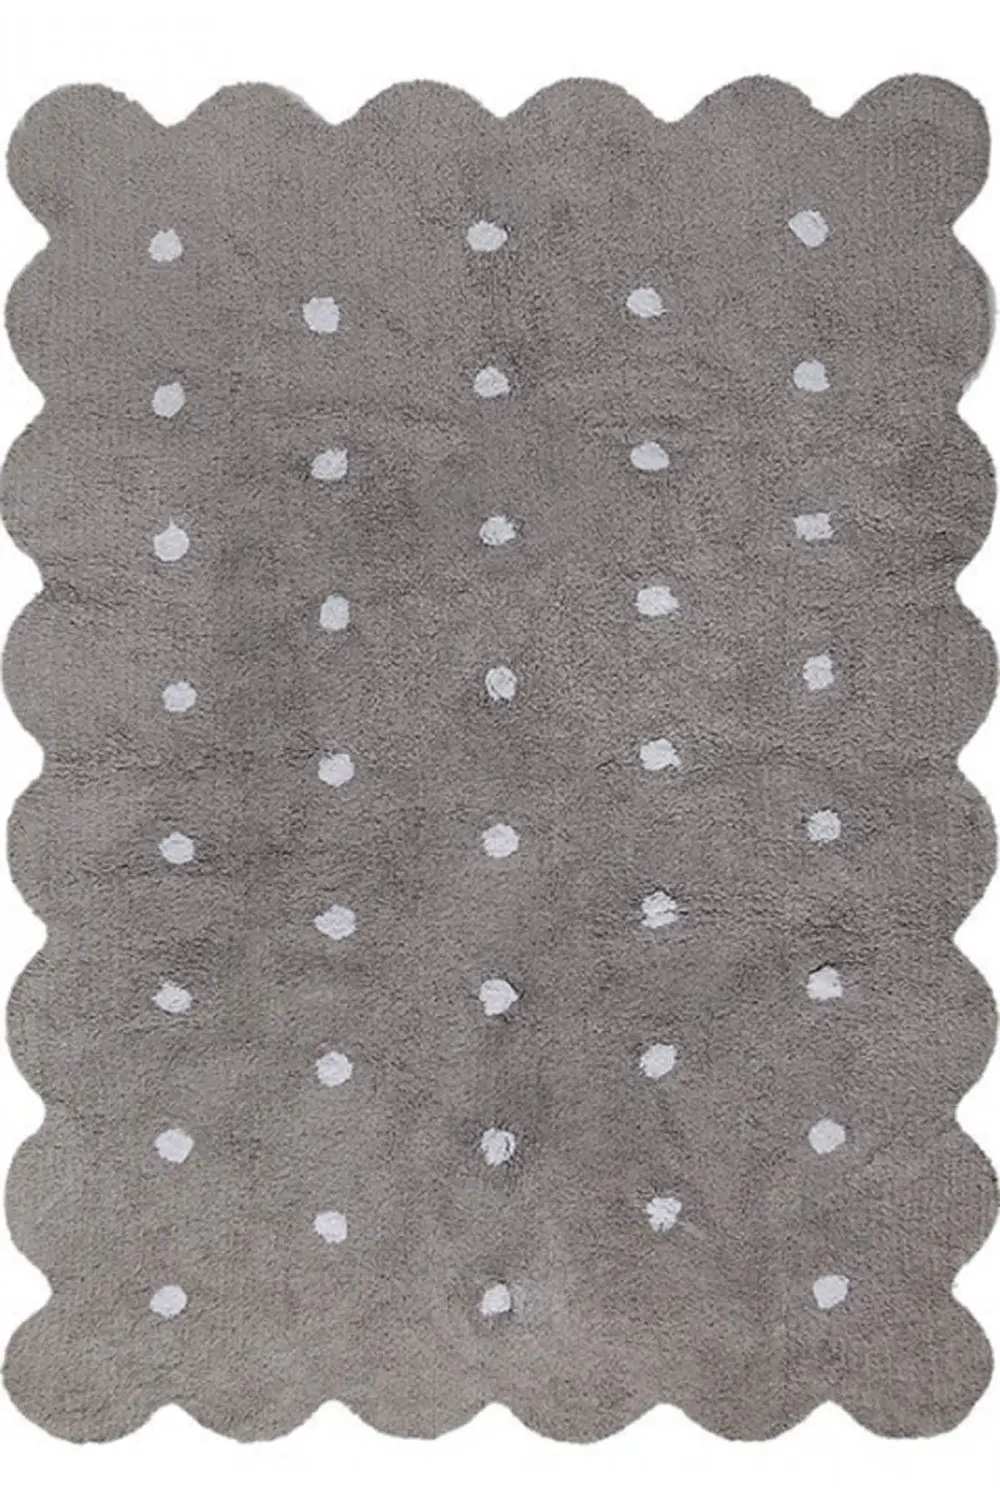 C-77775 4 x 5 Small Biscuit Gray Washable Rug-1